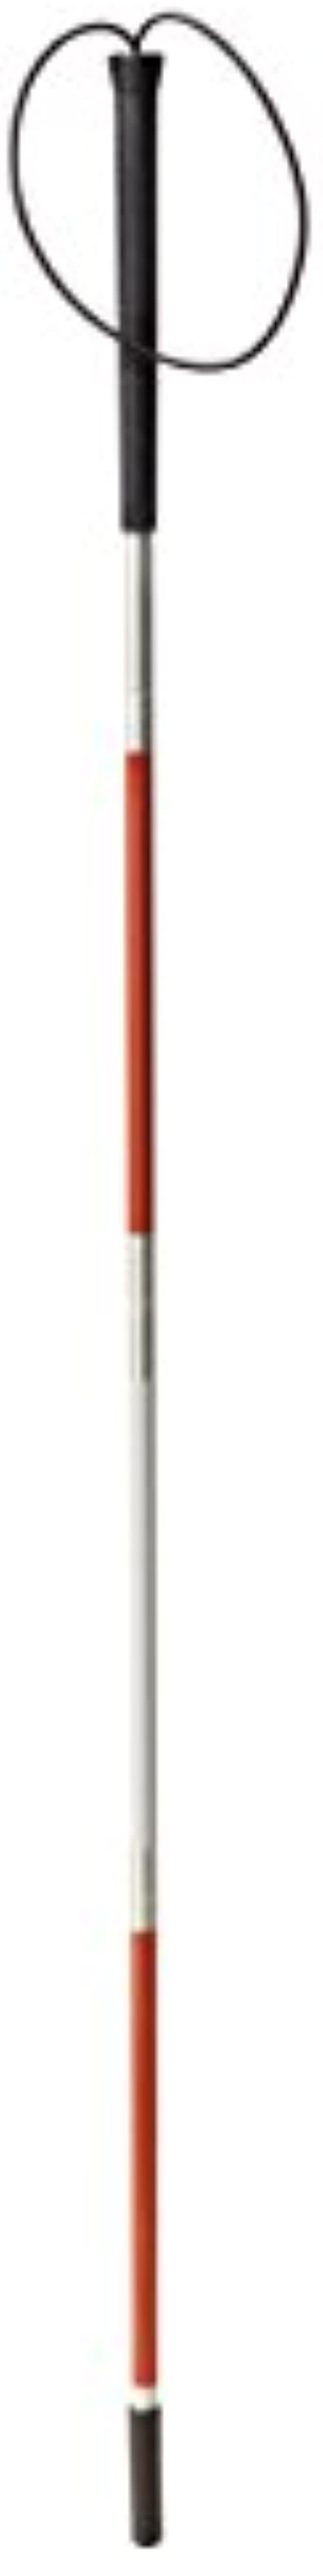 Drive Medical Deluxe Folding Blind Cane, Reflective Red